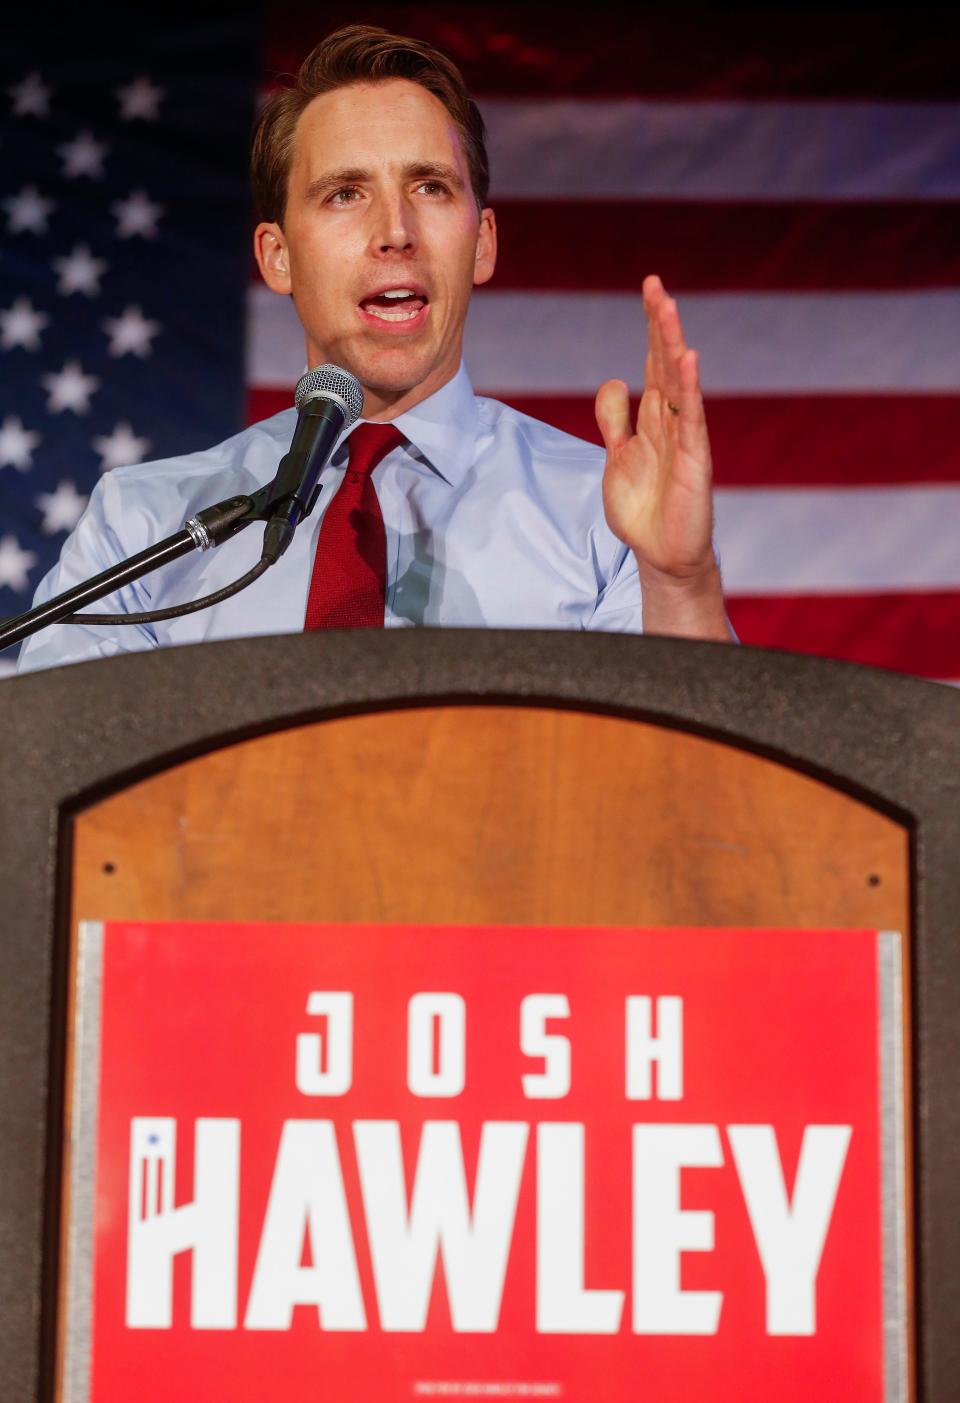 Josh Hawley speaks during the GOP watch party at the University Plaza Convention Center on Tuesday, Aug. 7, 2018.